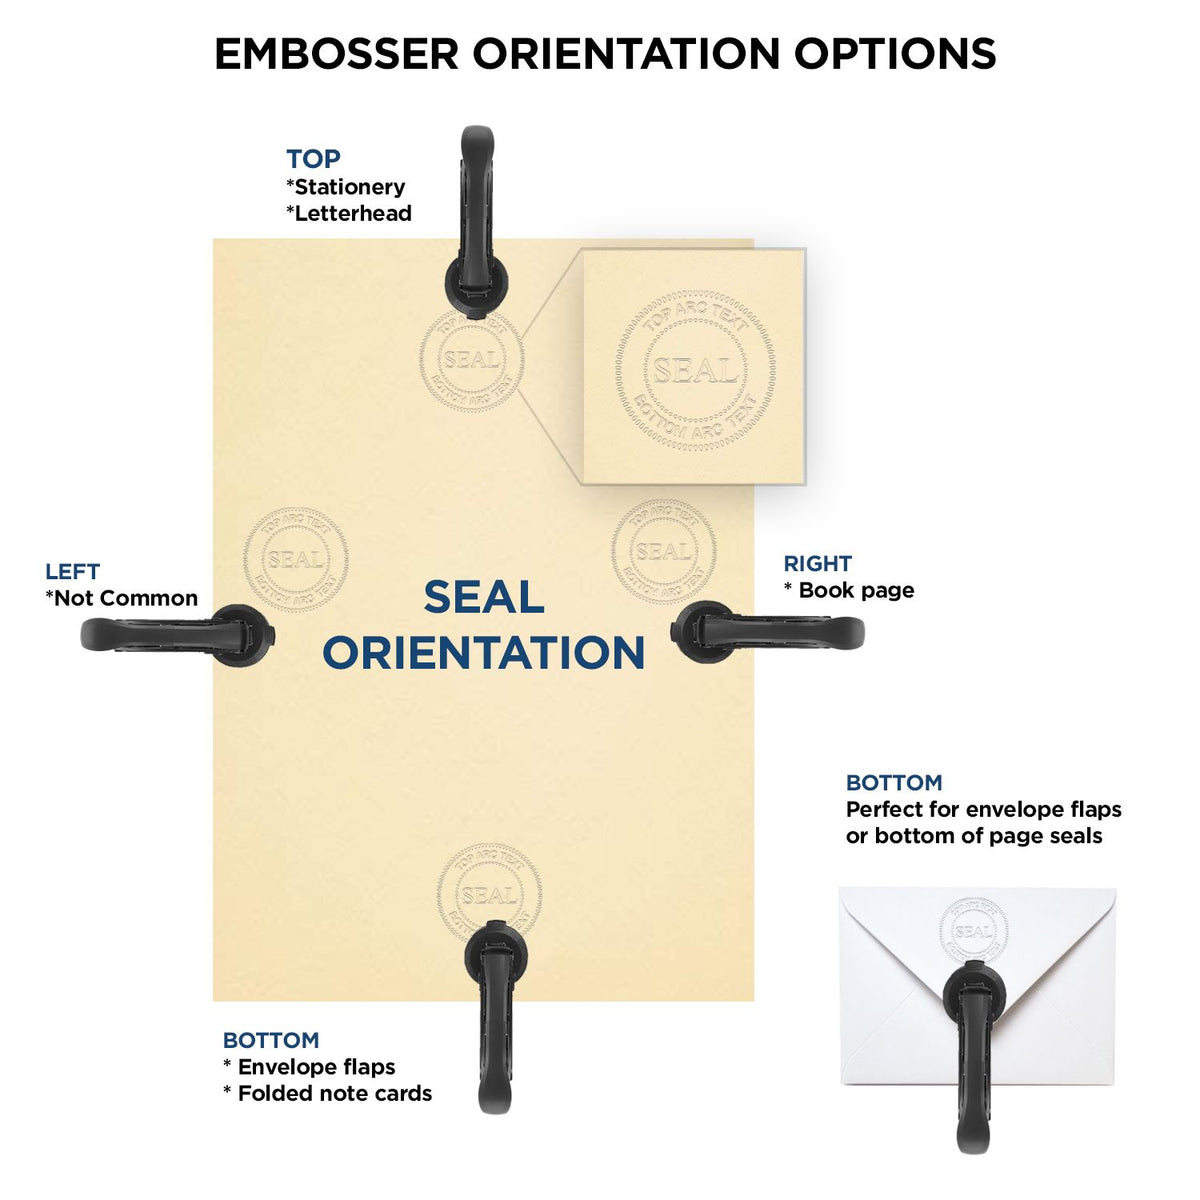 An infographic for the Long Reach Kentucky Land Surveyor Seal showing embosser orientation, this is showing examples of a top, bottom, right and left insert.